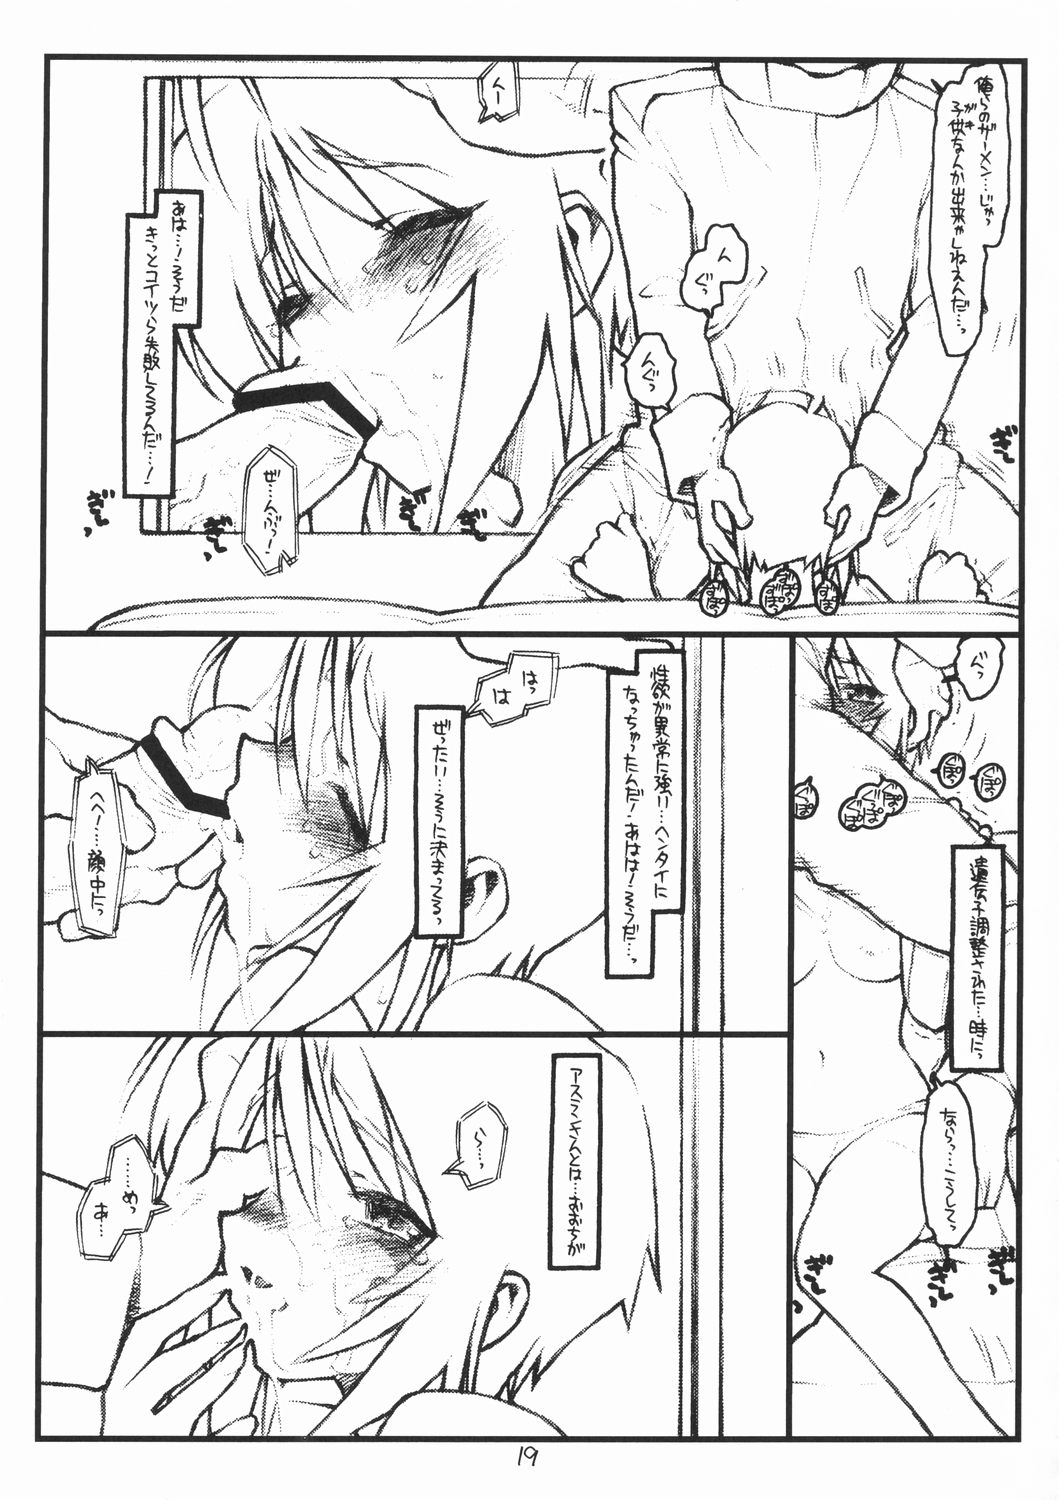 (SC28) [bolze. (rit.)] Miscoordination. (Mobile Suit Gundam SEED DESTINY) page 18 full